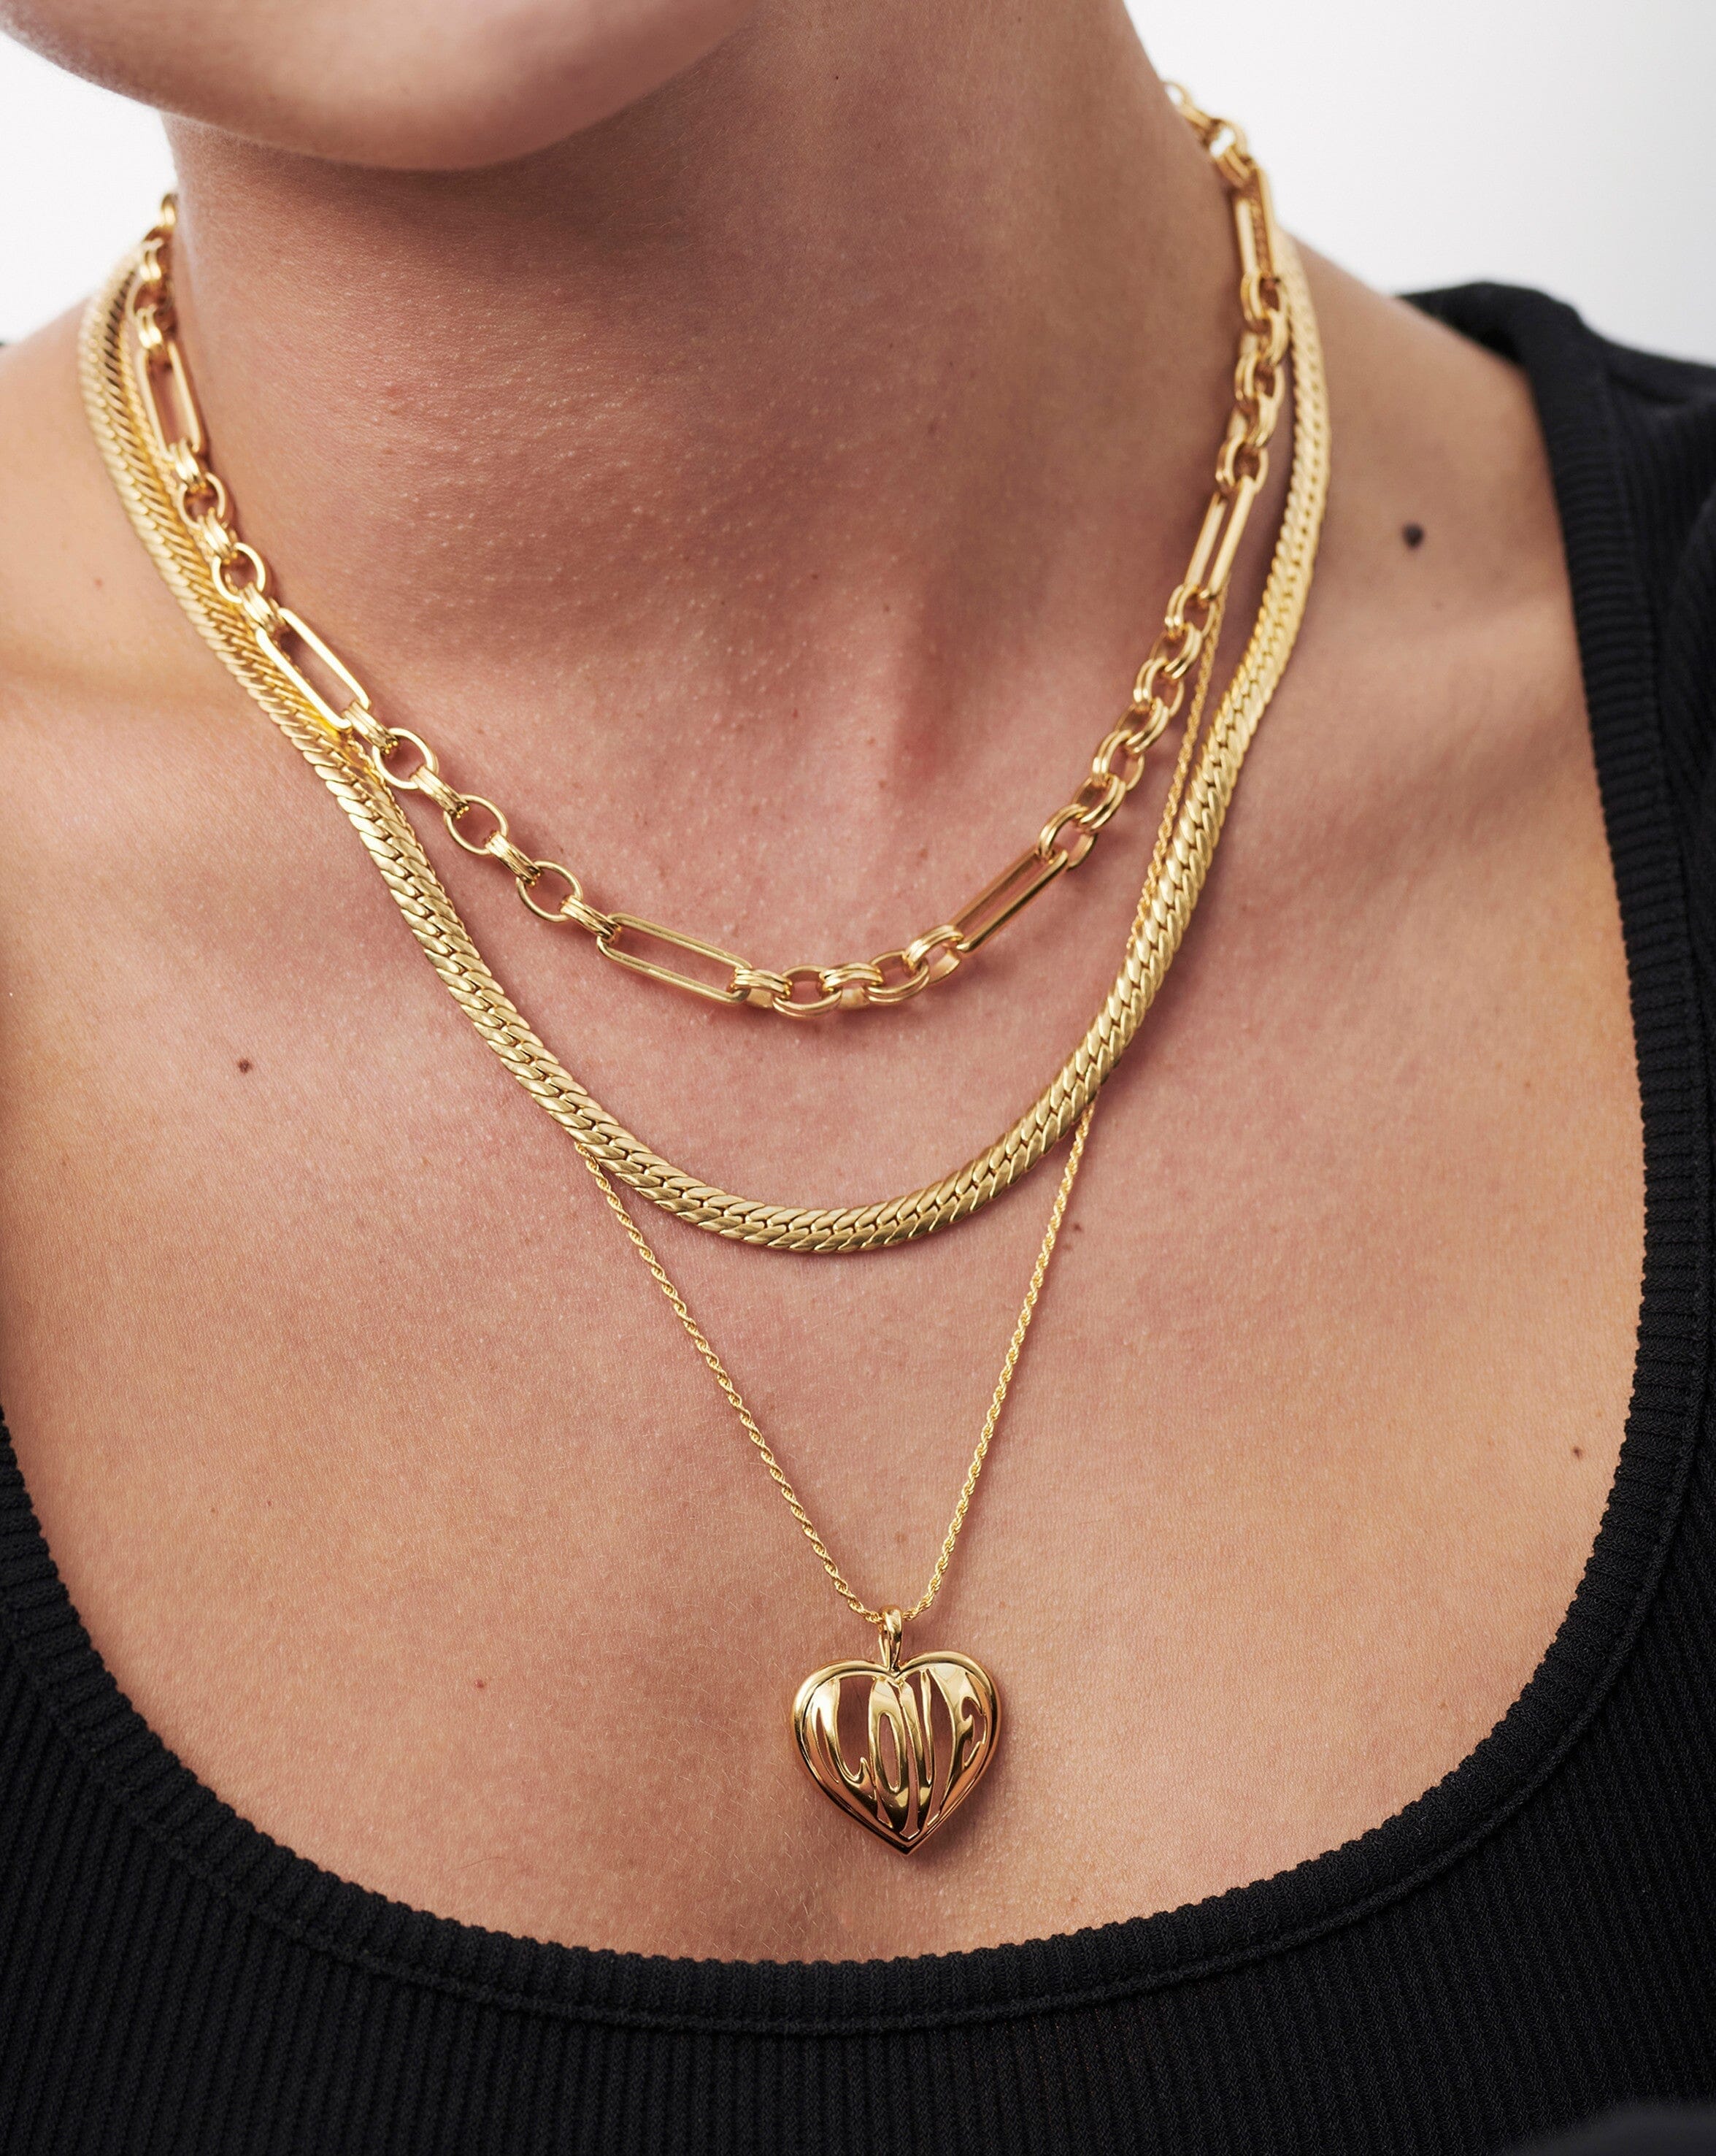 Polo diamond studded 18ct gold necklace | Necklaces / Pendants by Kate Smith